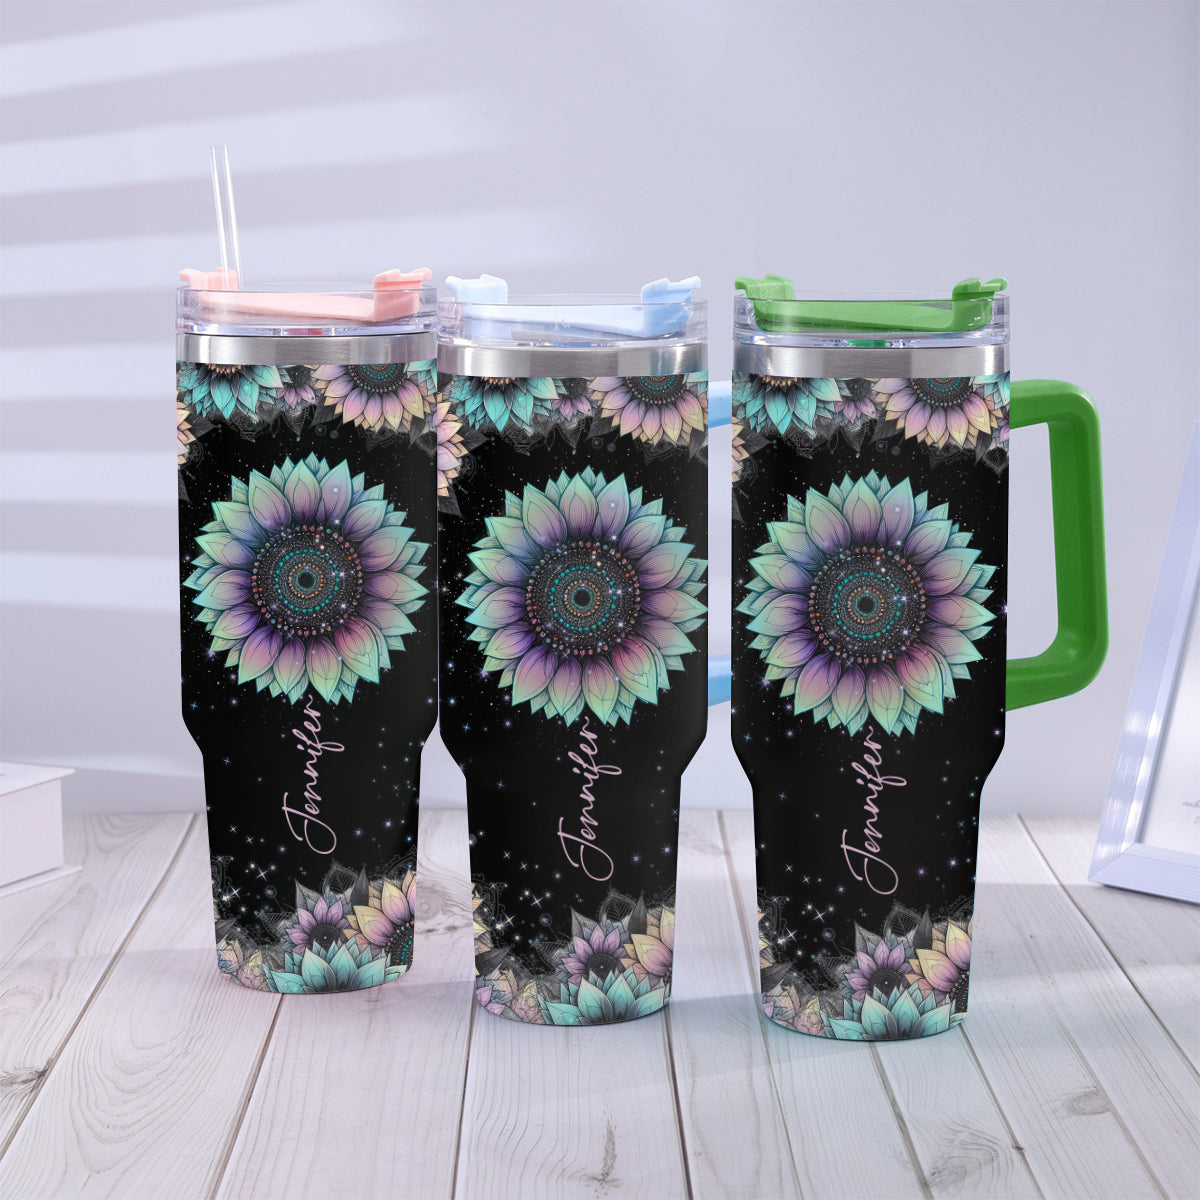 You Are My Sunshine - Personalized Skull Tumbler With Handle